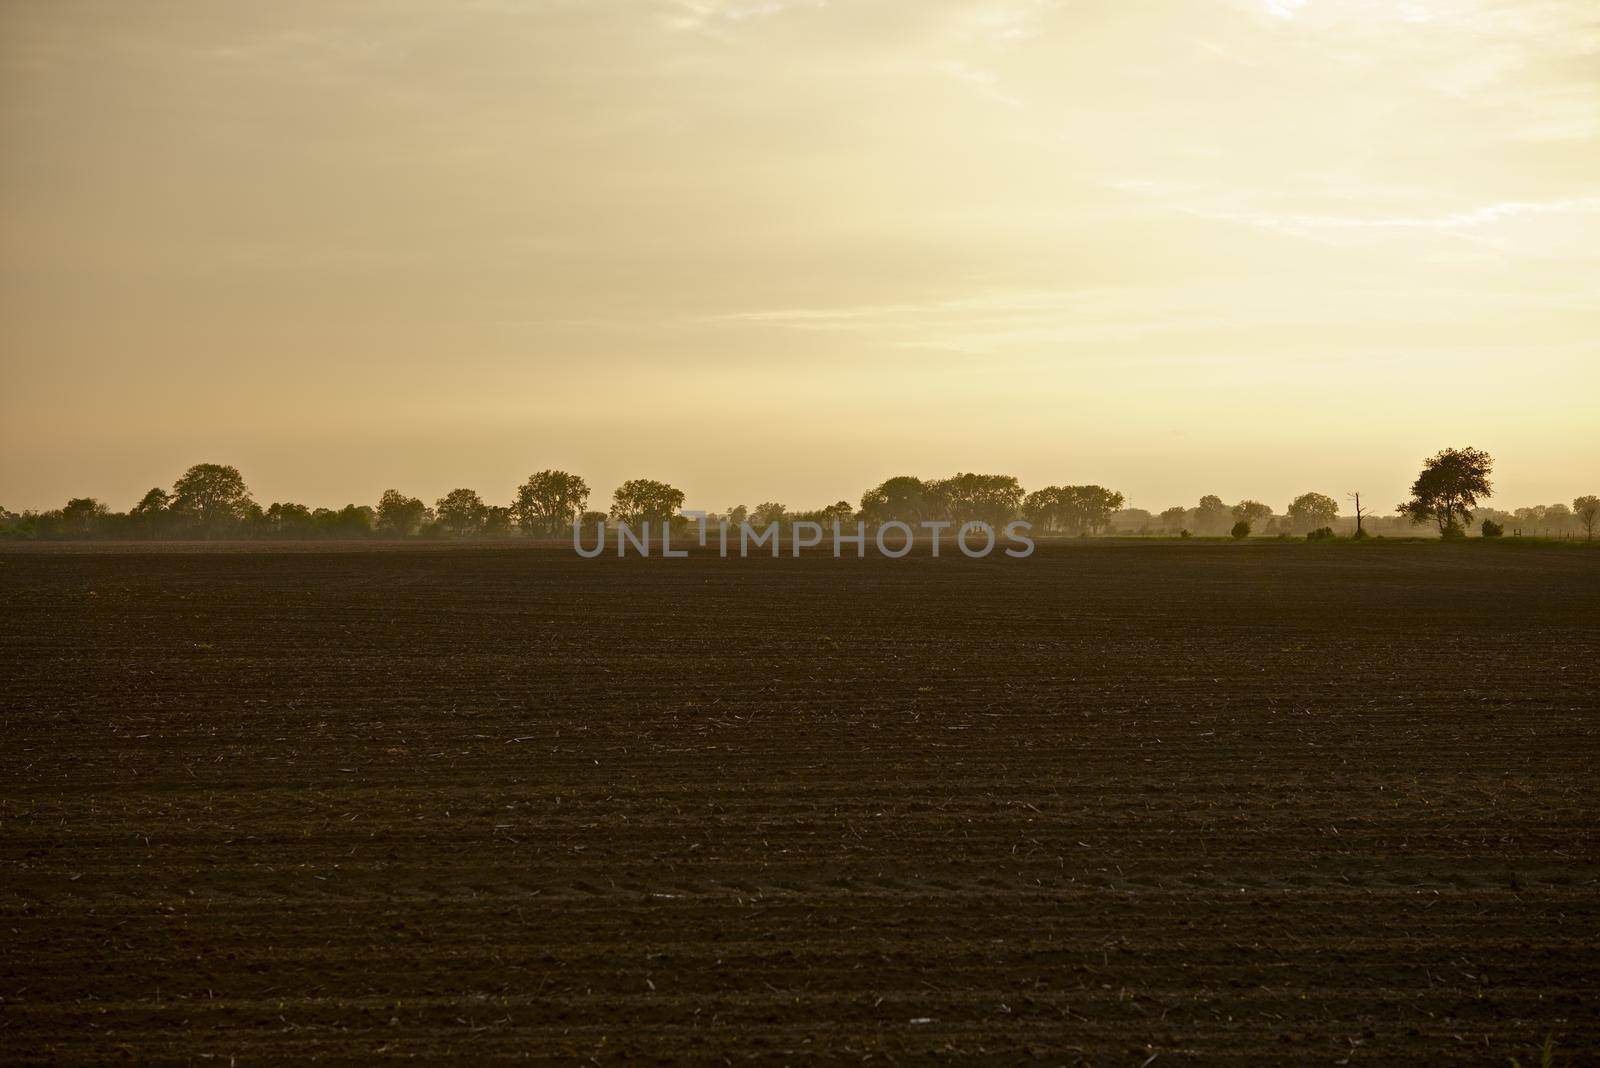 Illinois Farmlands. American Midwest Agriculture Photo Collection. Illinois State, USA.